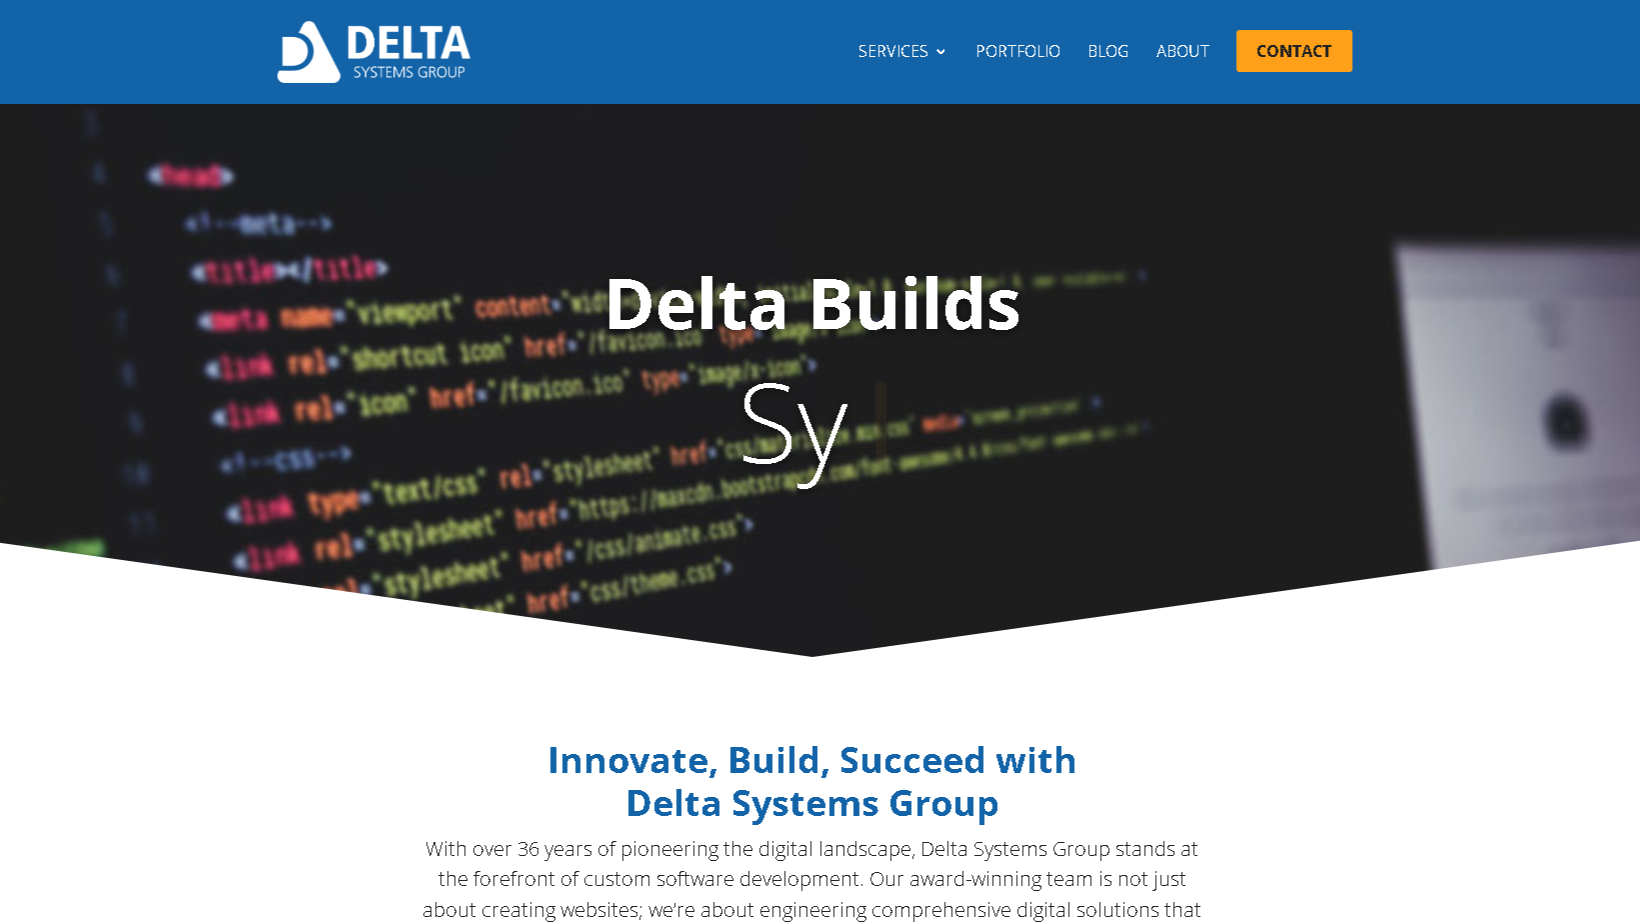 Delta Systems Group